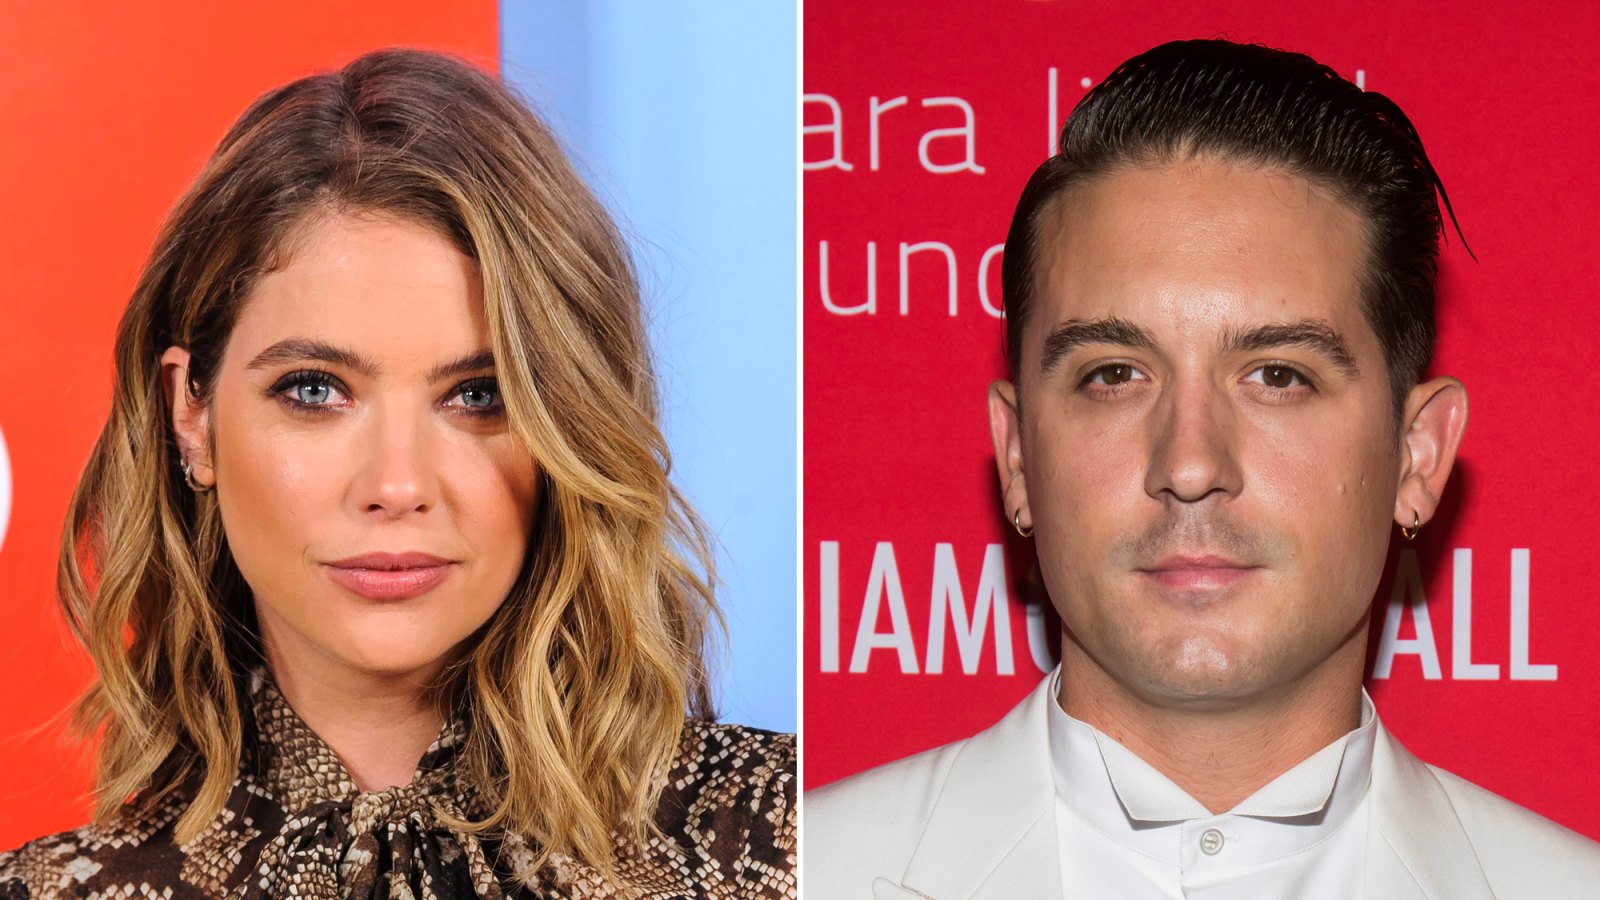 Ashley Benson and G-Eazy Are Together Again They Never Lost Touch